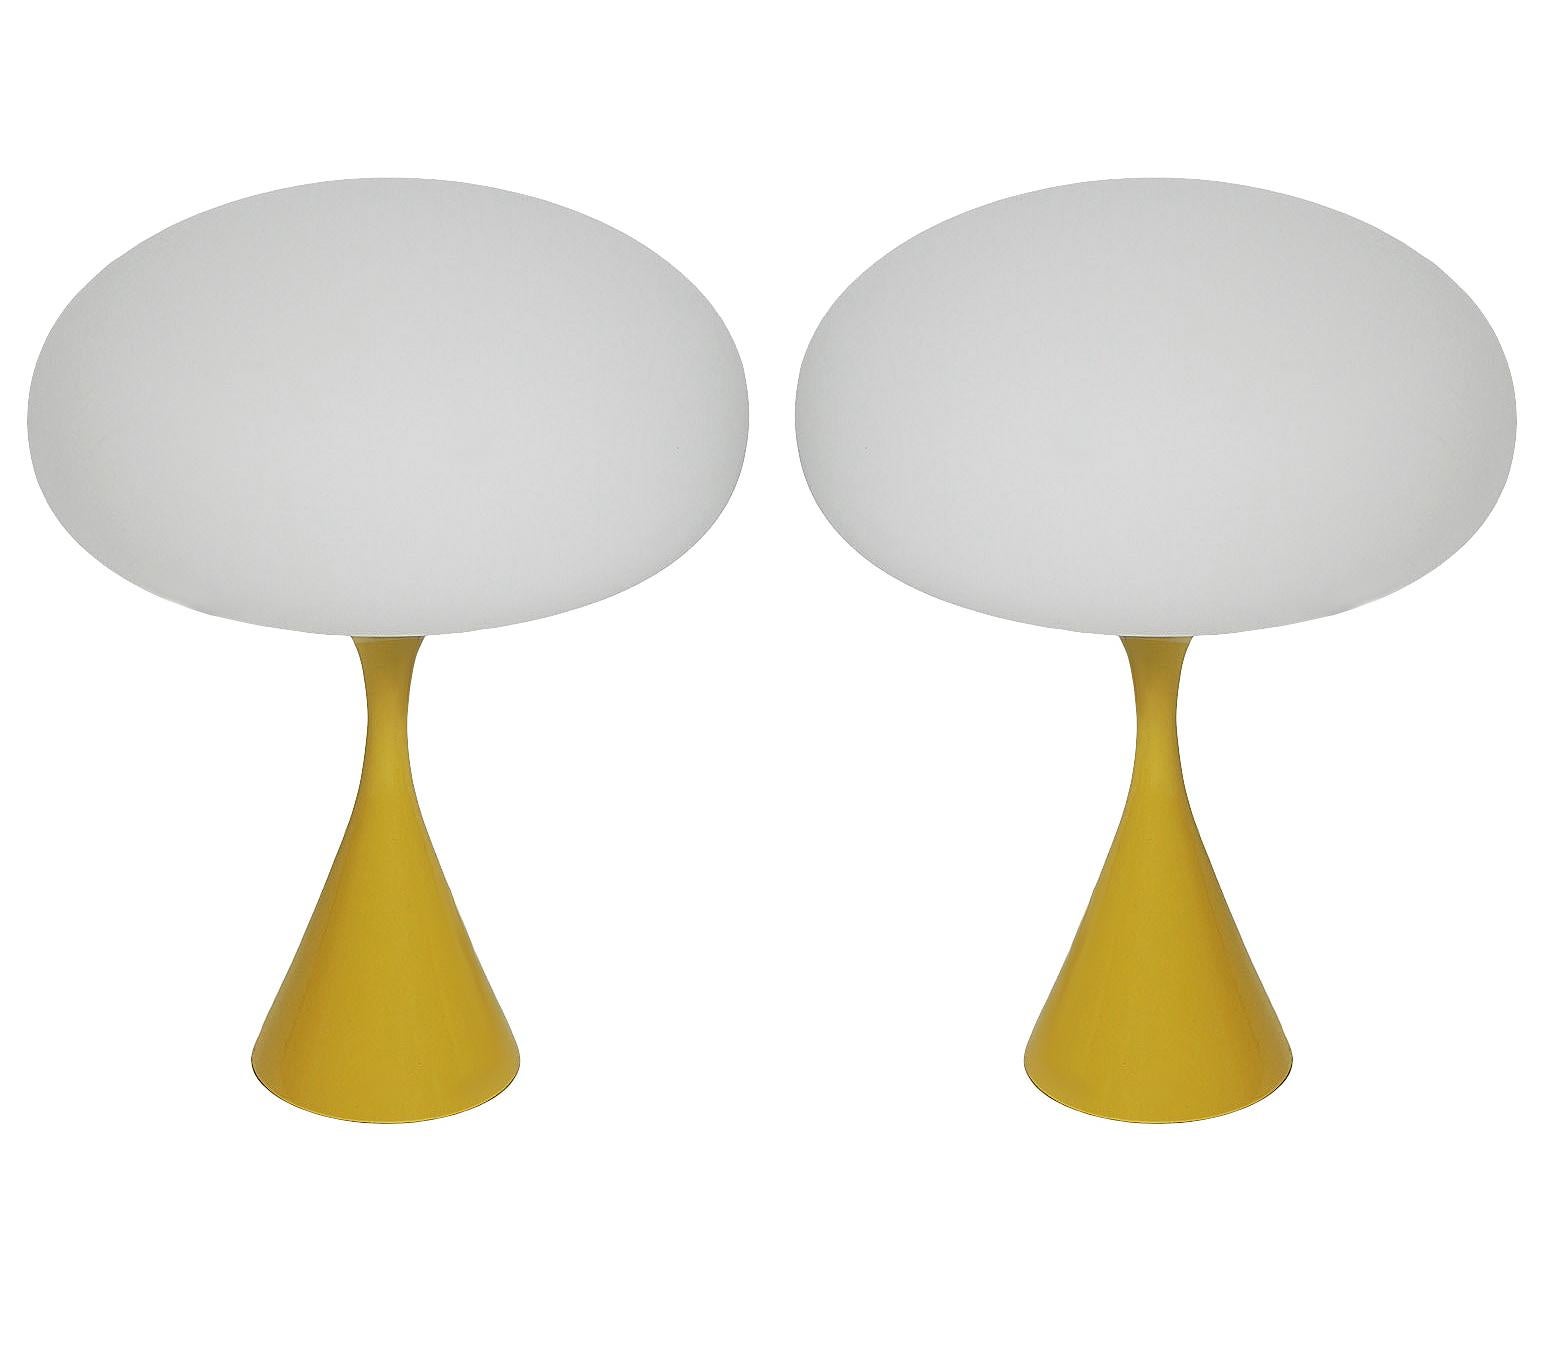 Indian Pair of Mid-Century Modern Table Lamps by Designline in Yellow & White Glass For Sale